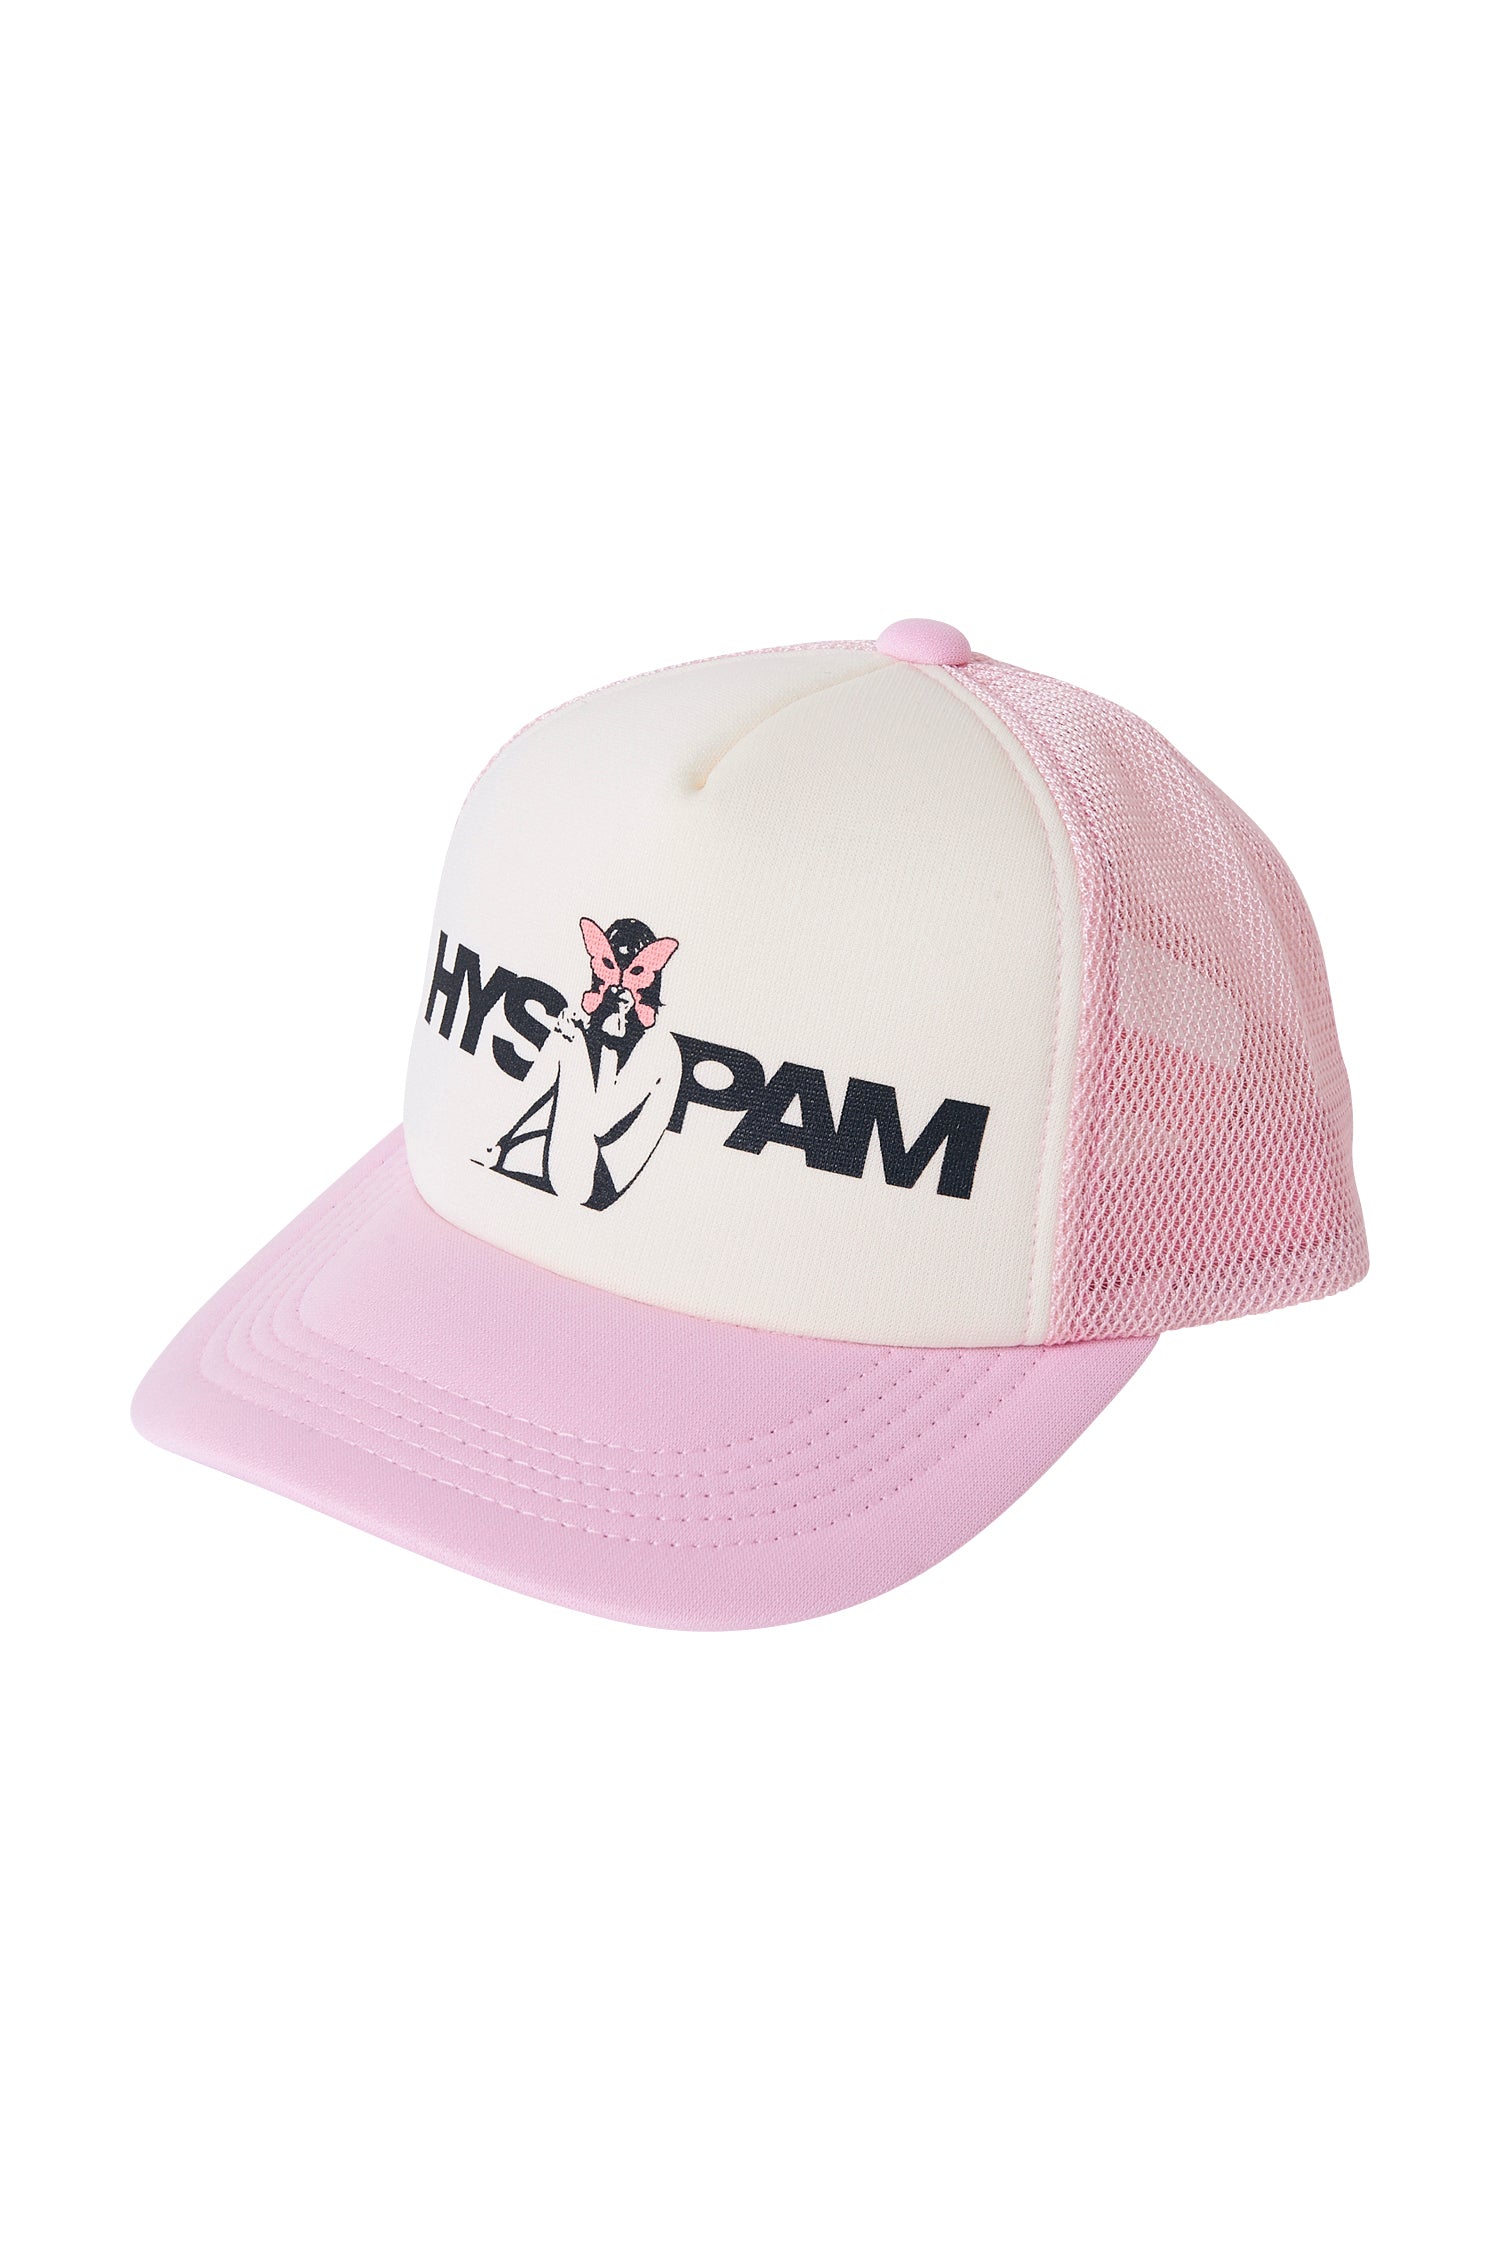 The PAM X HYSTERIC GLAMOUR - ALIEN GIRL TRUCKER CAP PINK available online with global shipping, and in PAM Stores Melbourne and Sydney.